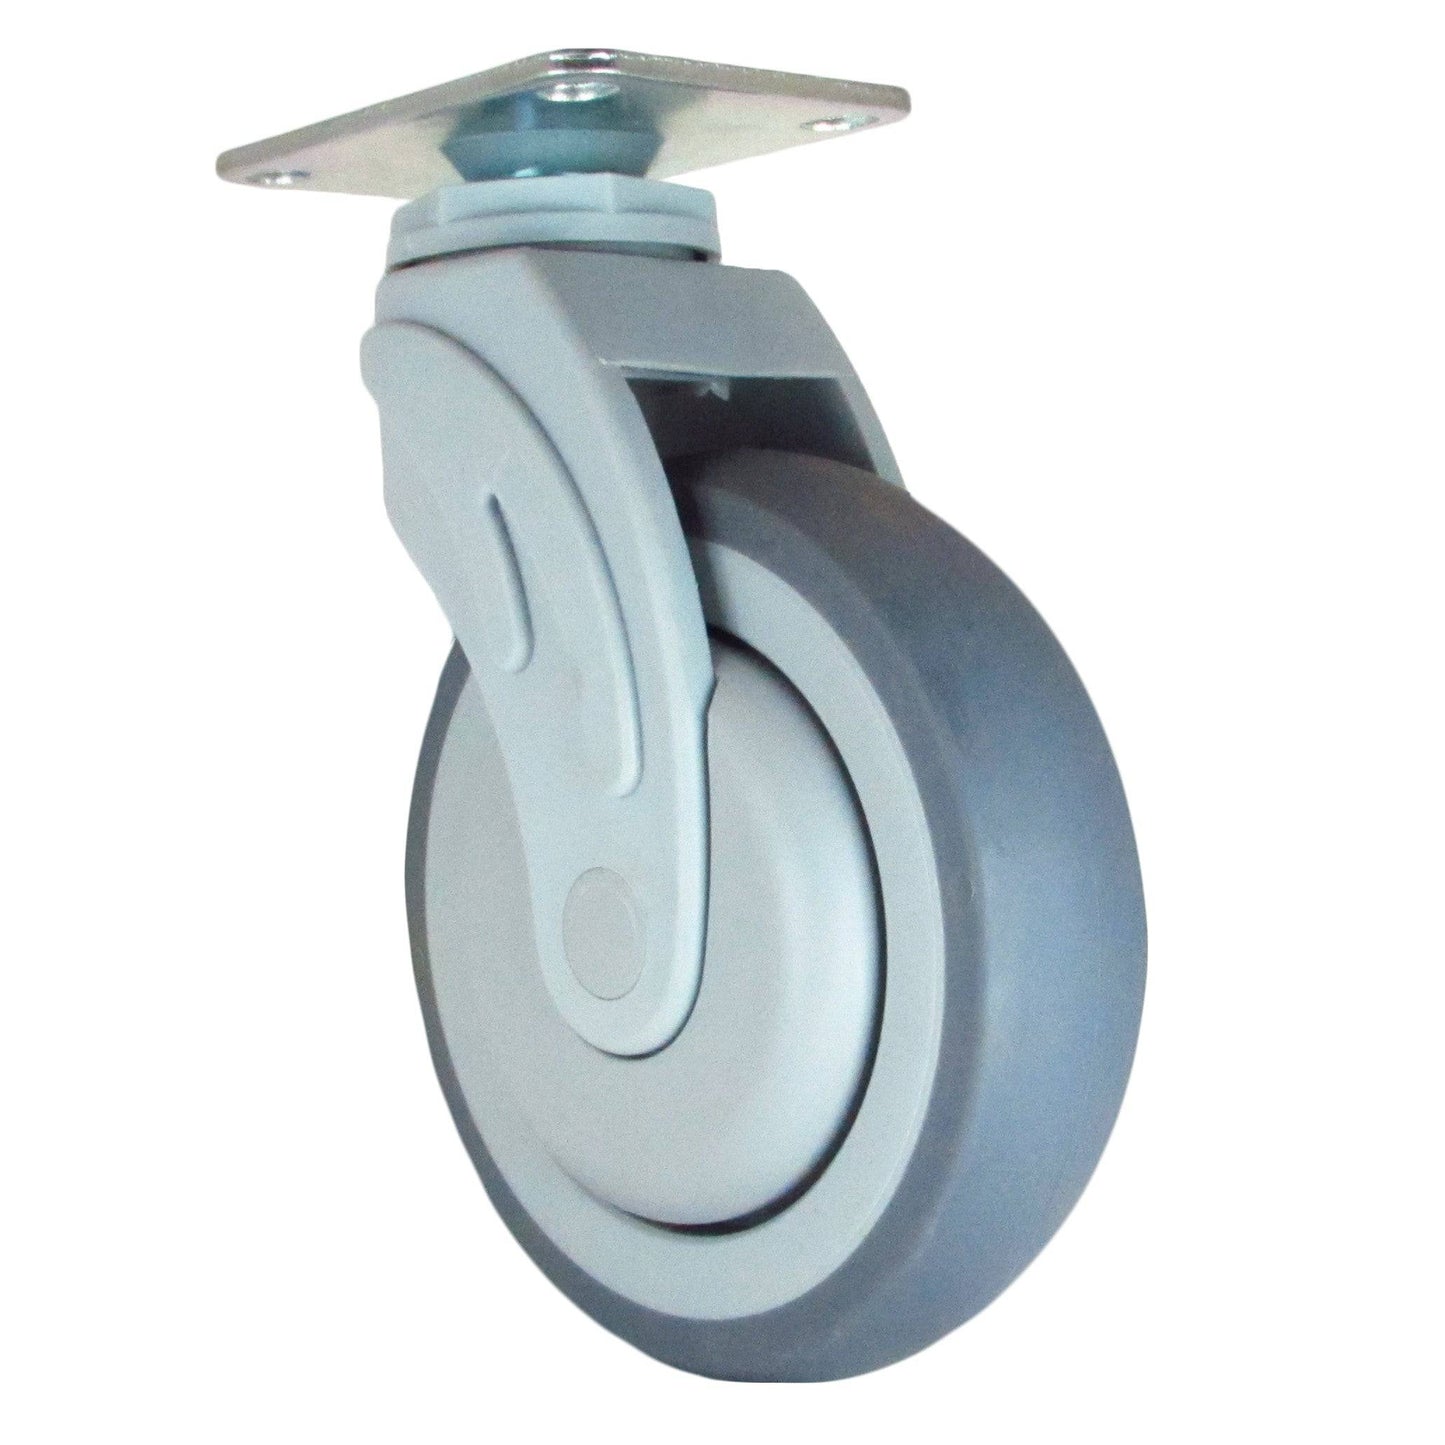 5" x 1-1/4" Polimed Wheel Swivel Caster 300 lbs. Cap - Durable Superior Casters